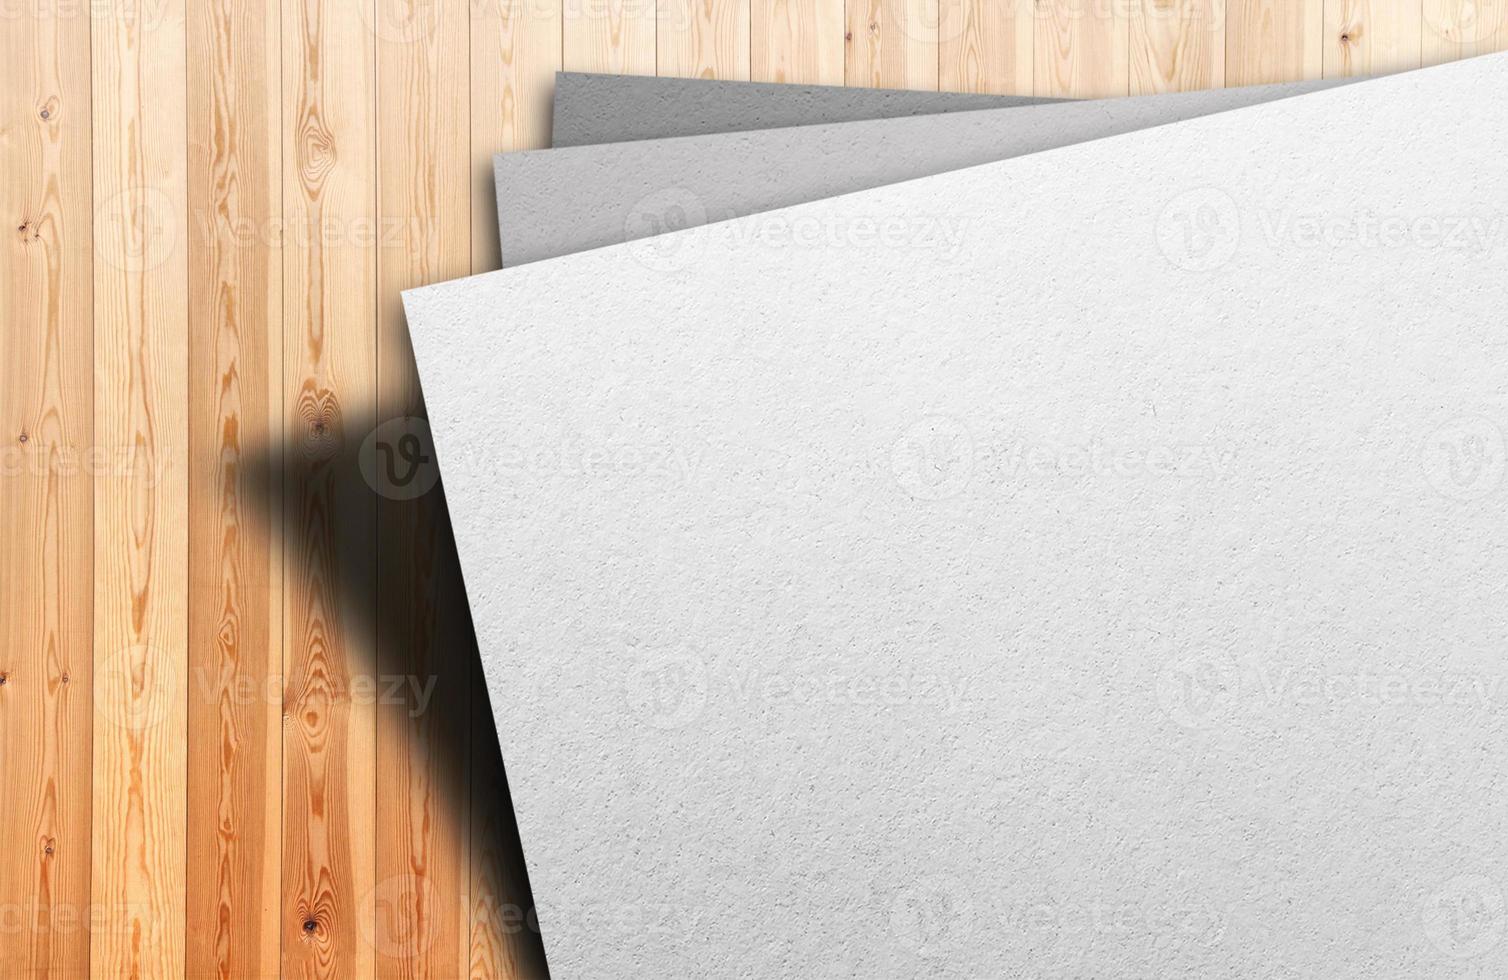 Logo paper template . Square paper mockup with realistic shades of gray paper on a wooden background. Shade tropical plants. Template, flyer, blank advertisement poster for social media photo